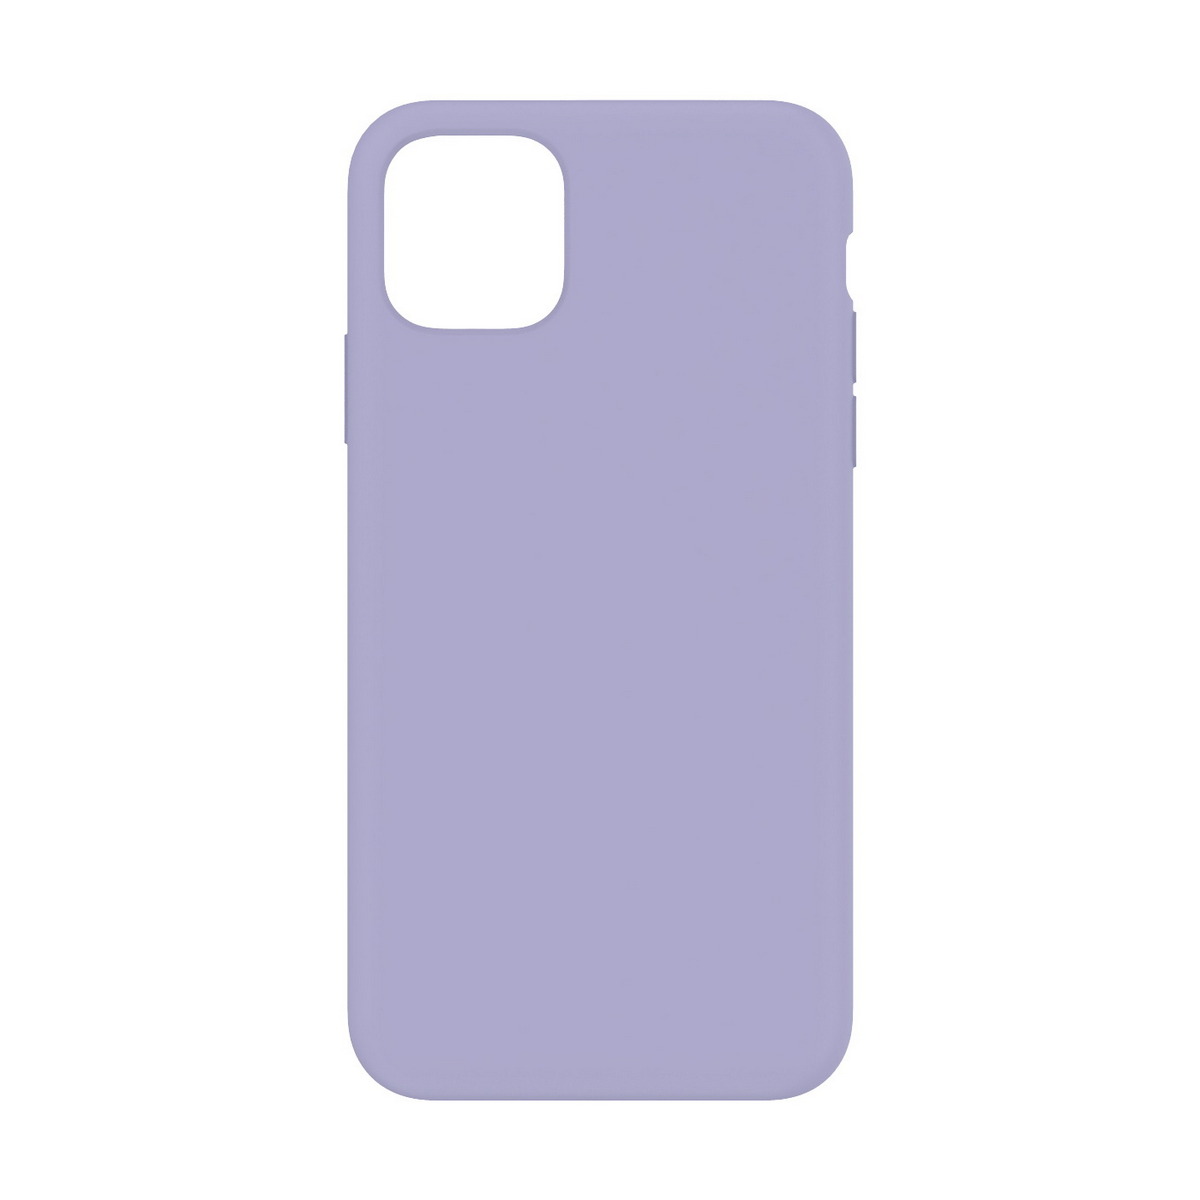 HEAL Case for iPhone 11 Pro Max (Purple) Case Silicone